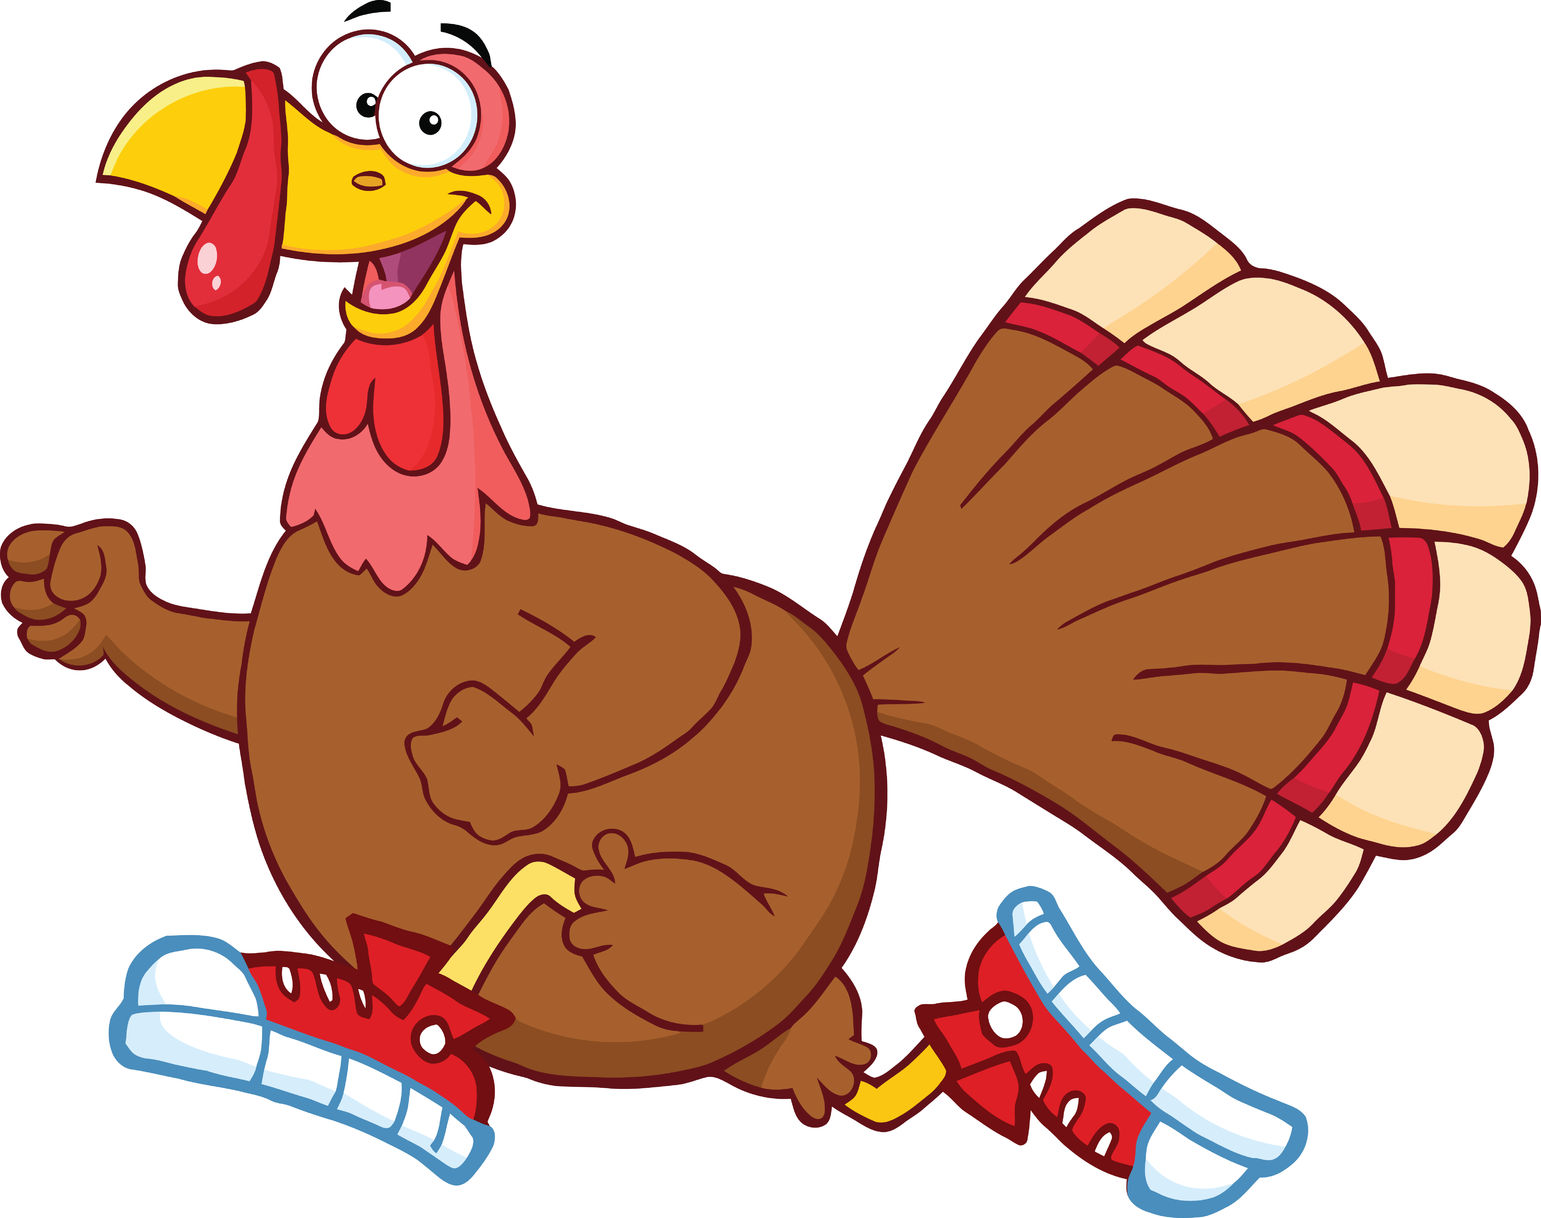 Free Turkey Cliparts Christmas, Download Free Turkey Cliparts Christmas